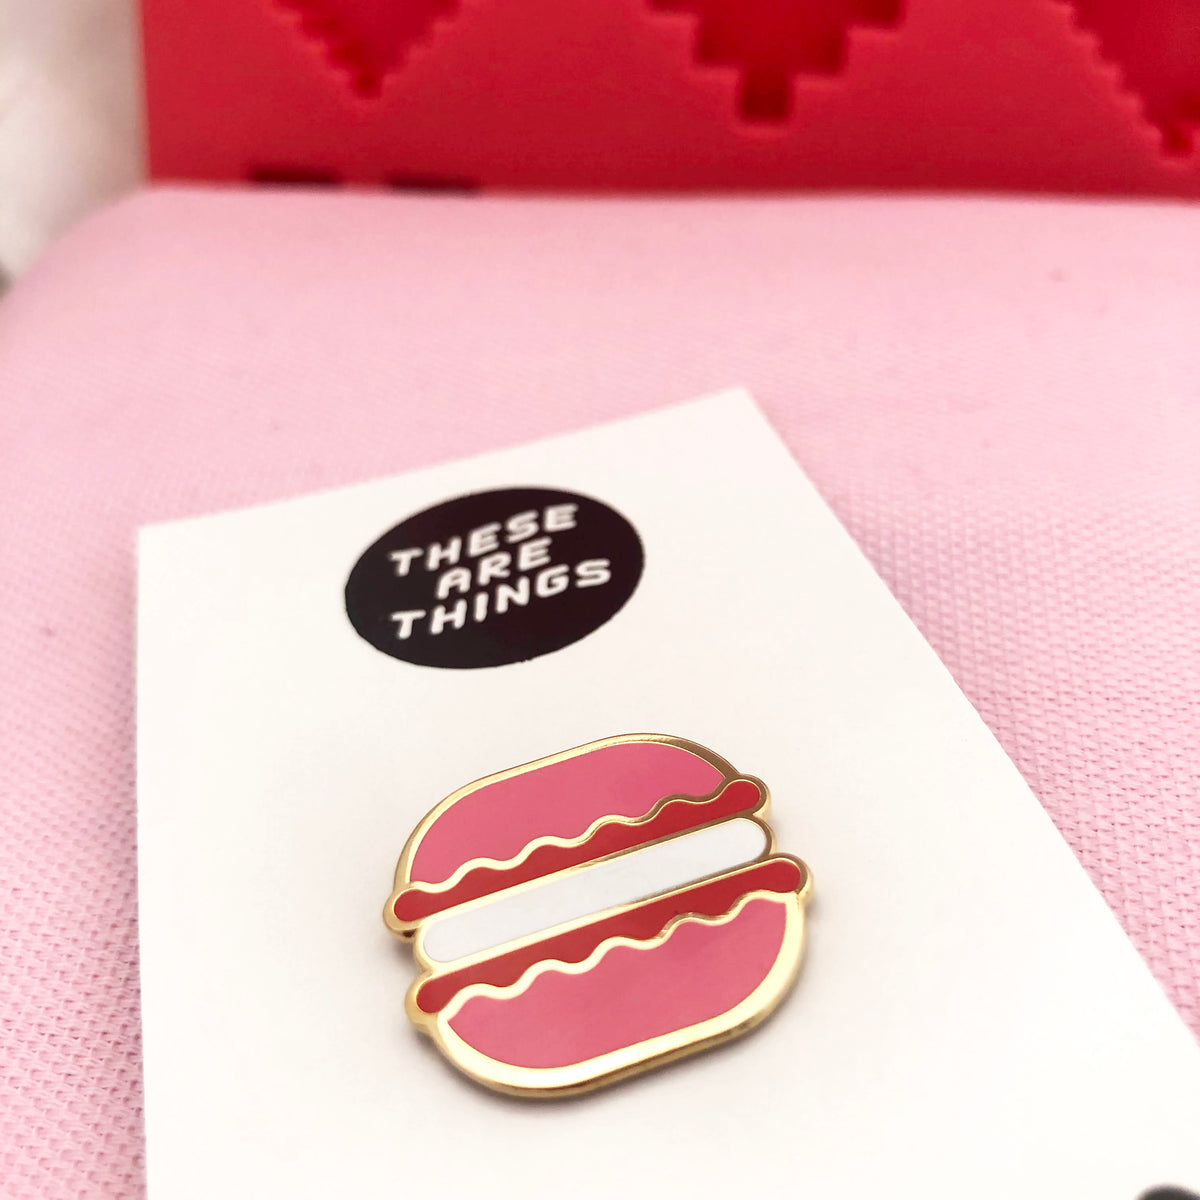 These Are Strawberry Macaroon Pin